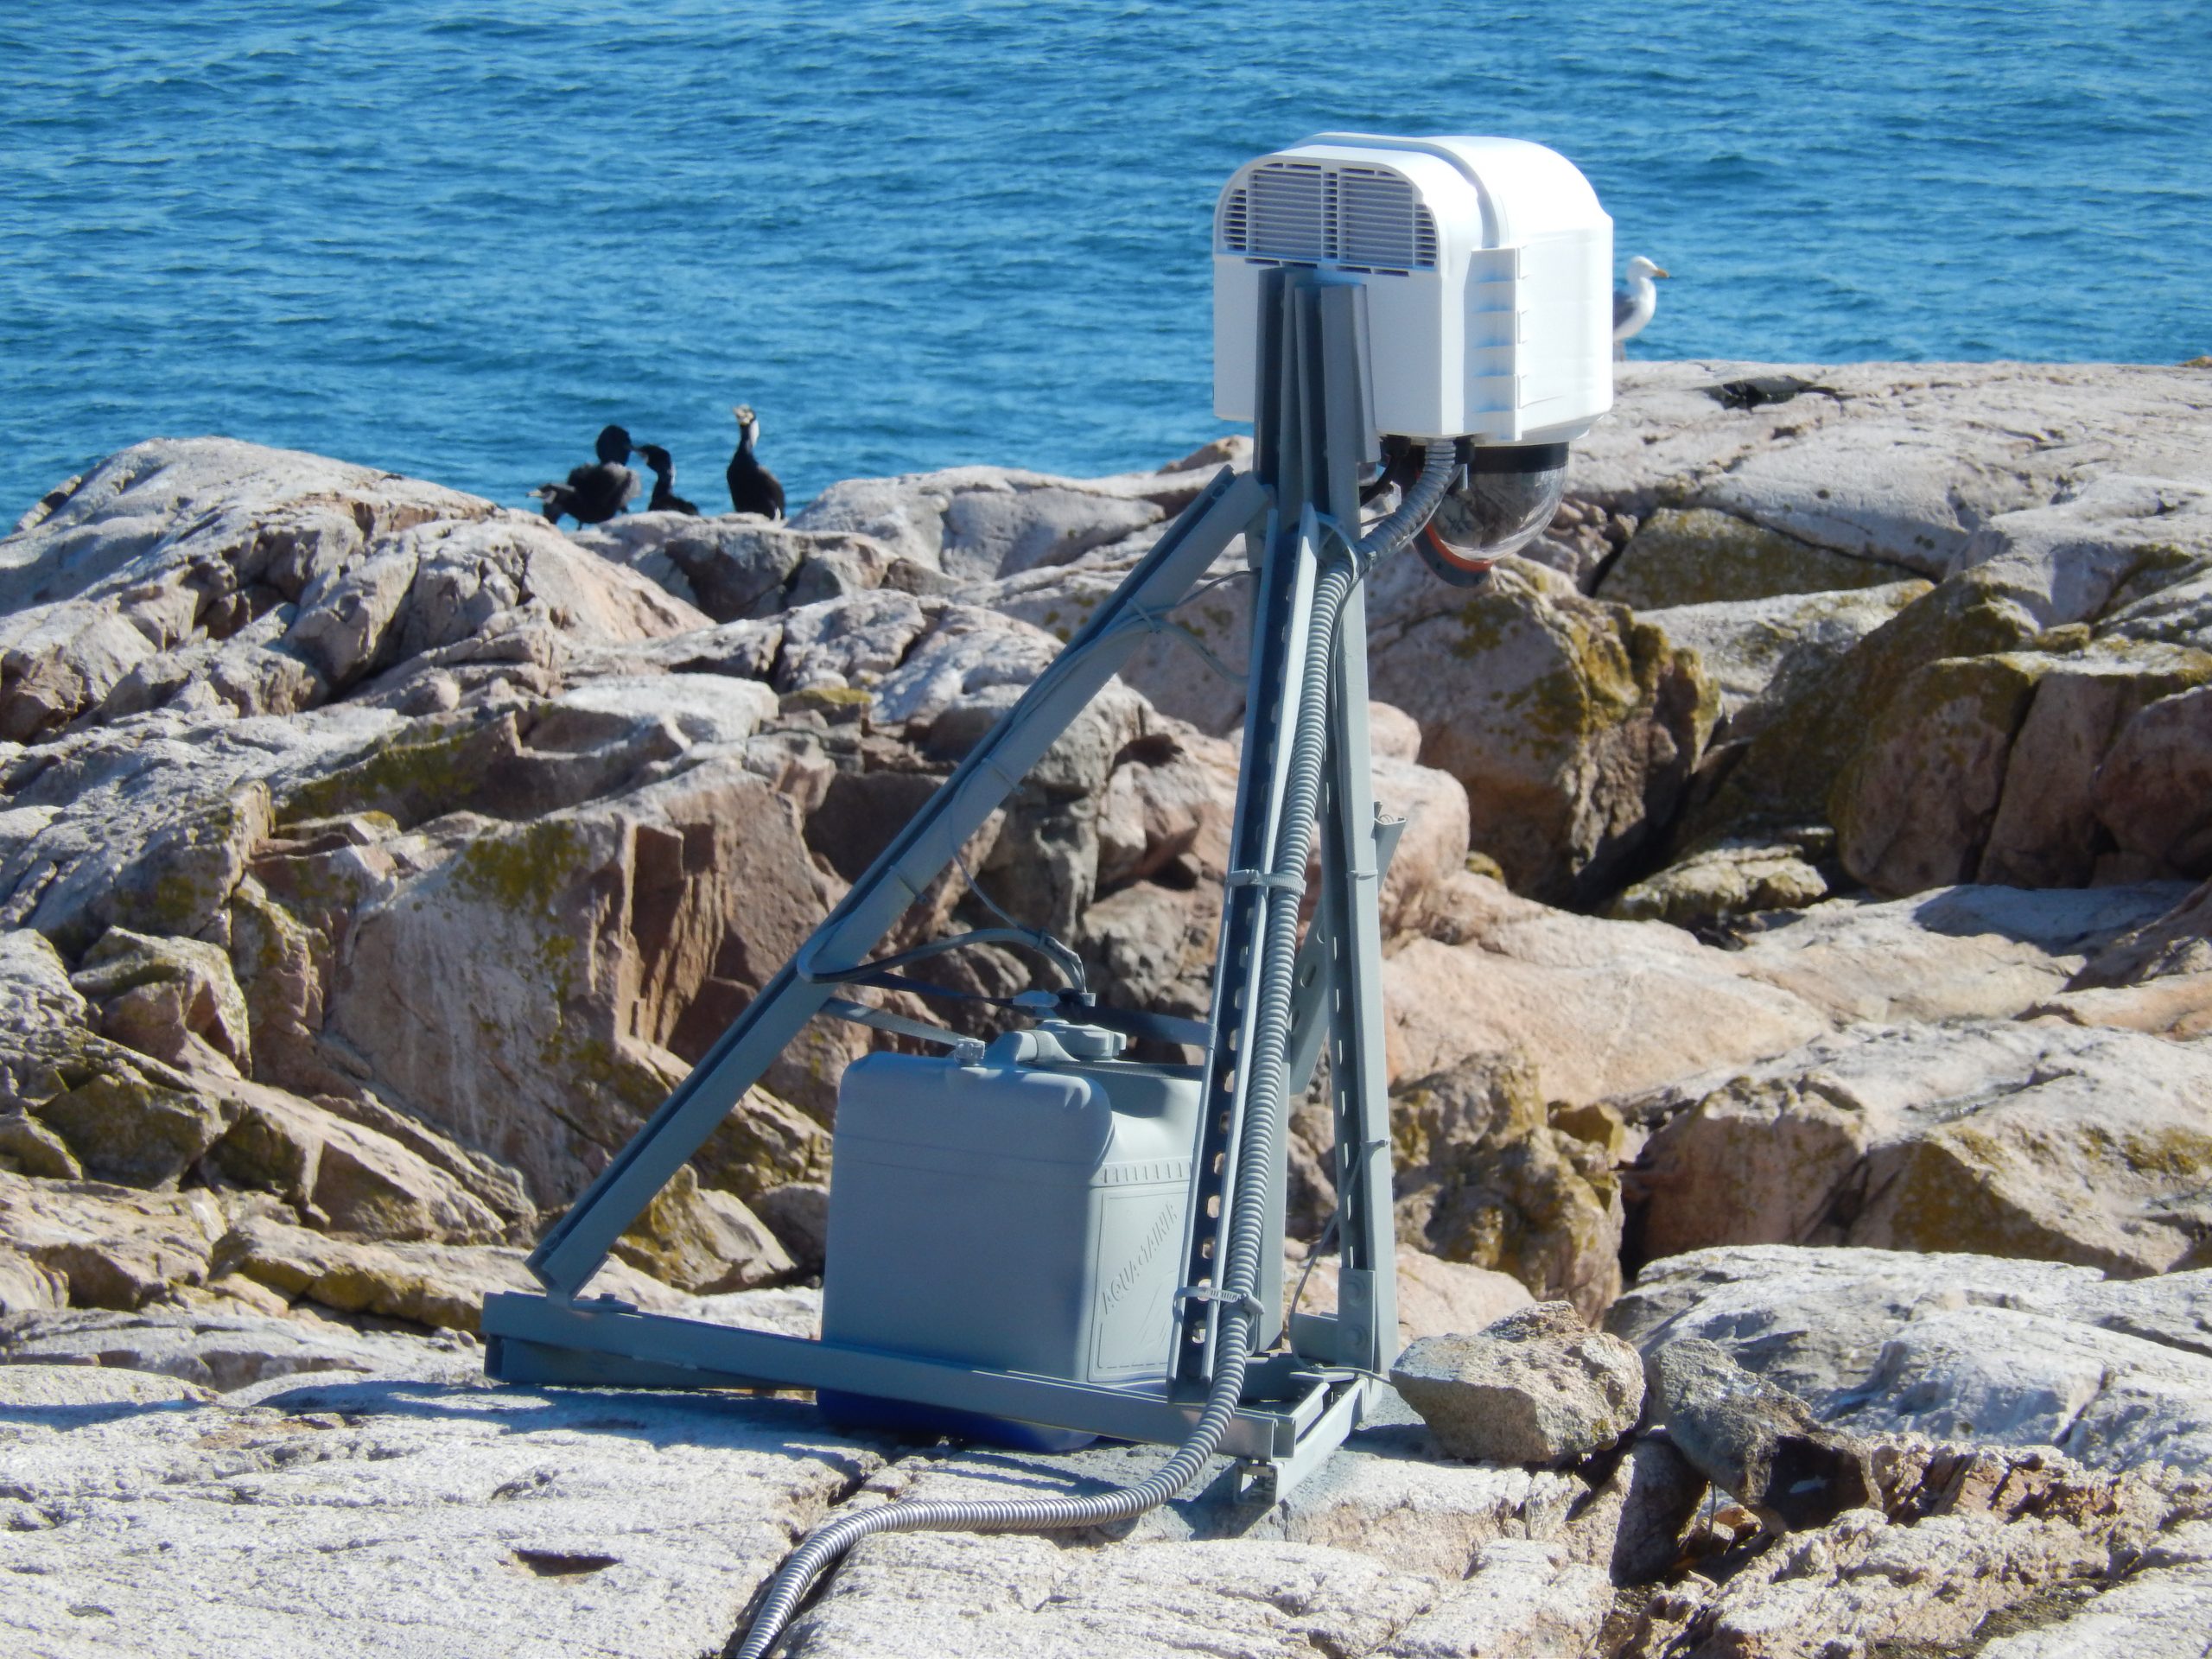 XClear Self Cleaning Enclosure System Installed on Seal Island overlooking a Cormorant colony of birds for observation. 